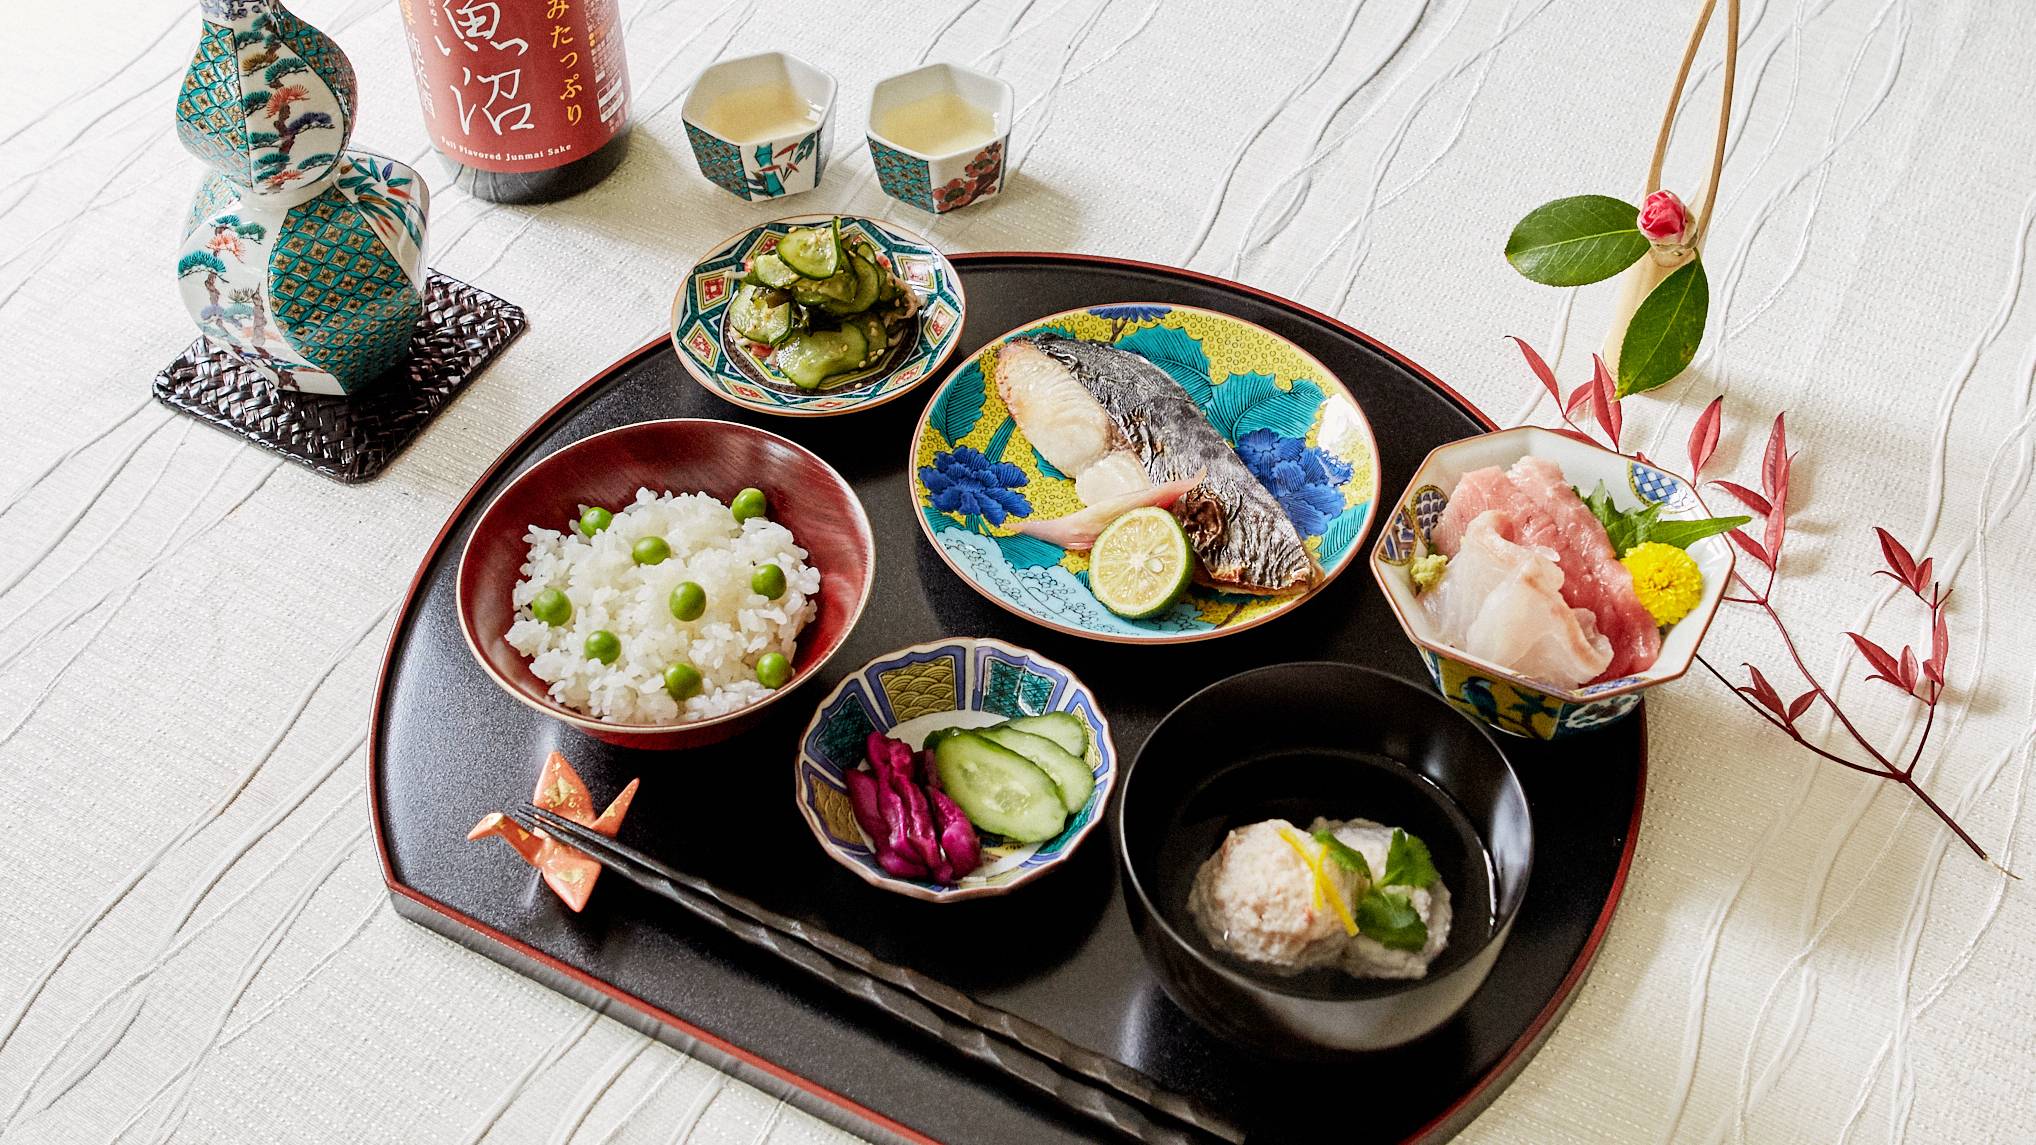 12 Piece Japanese Style Sushi Plate Set - Includes 4